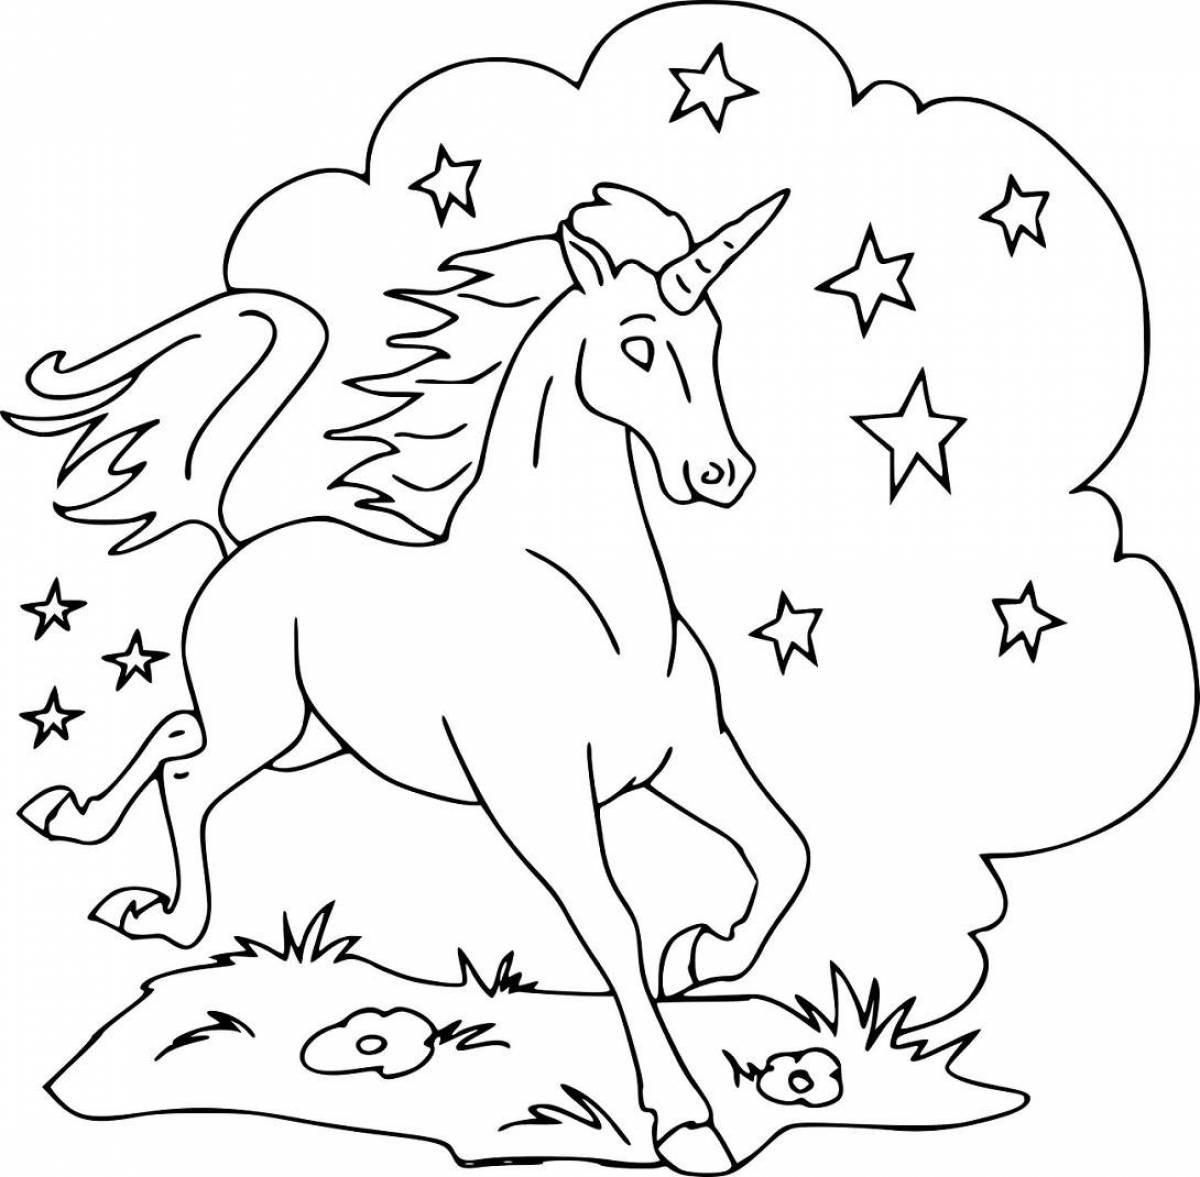 Charming unicorn coloring book for kids 6-7 years old